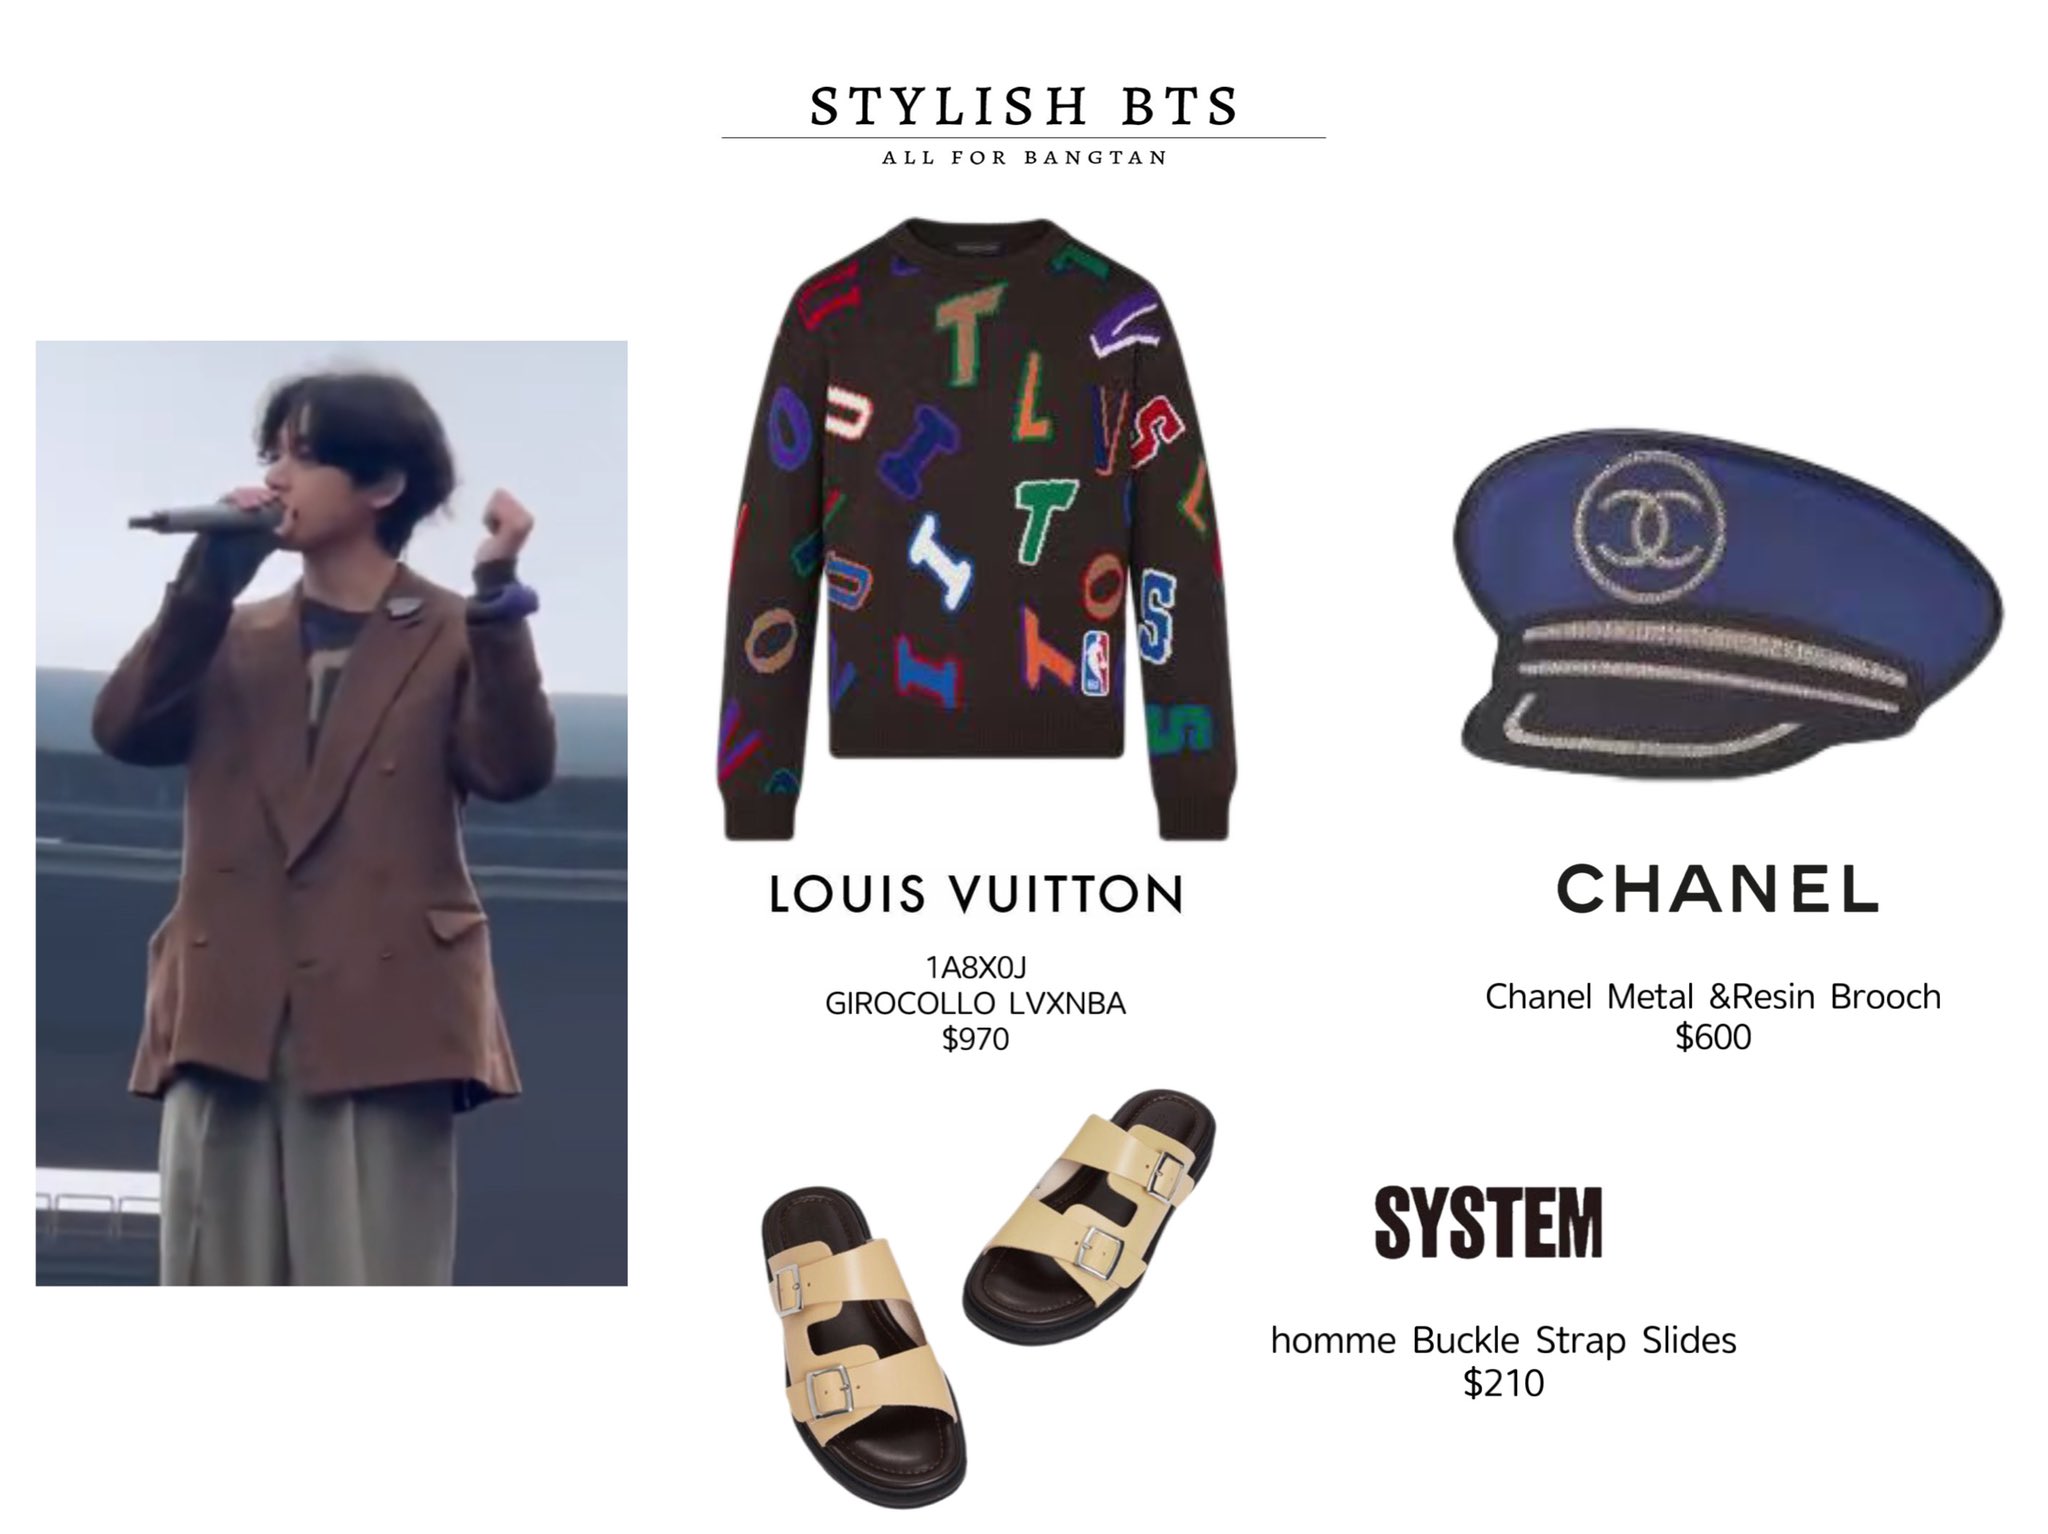 Jungkook SNS  on X: INFO  Louis Vuitton Monogram Mink Fur Zipped Hoodie  worn by Jungkook at Day 3 Soundcheck of PTD On Stage Seoul is Out Of Stock  in ALL